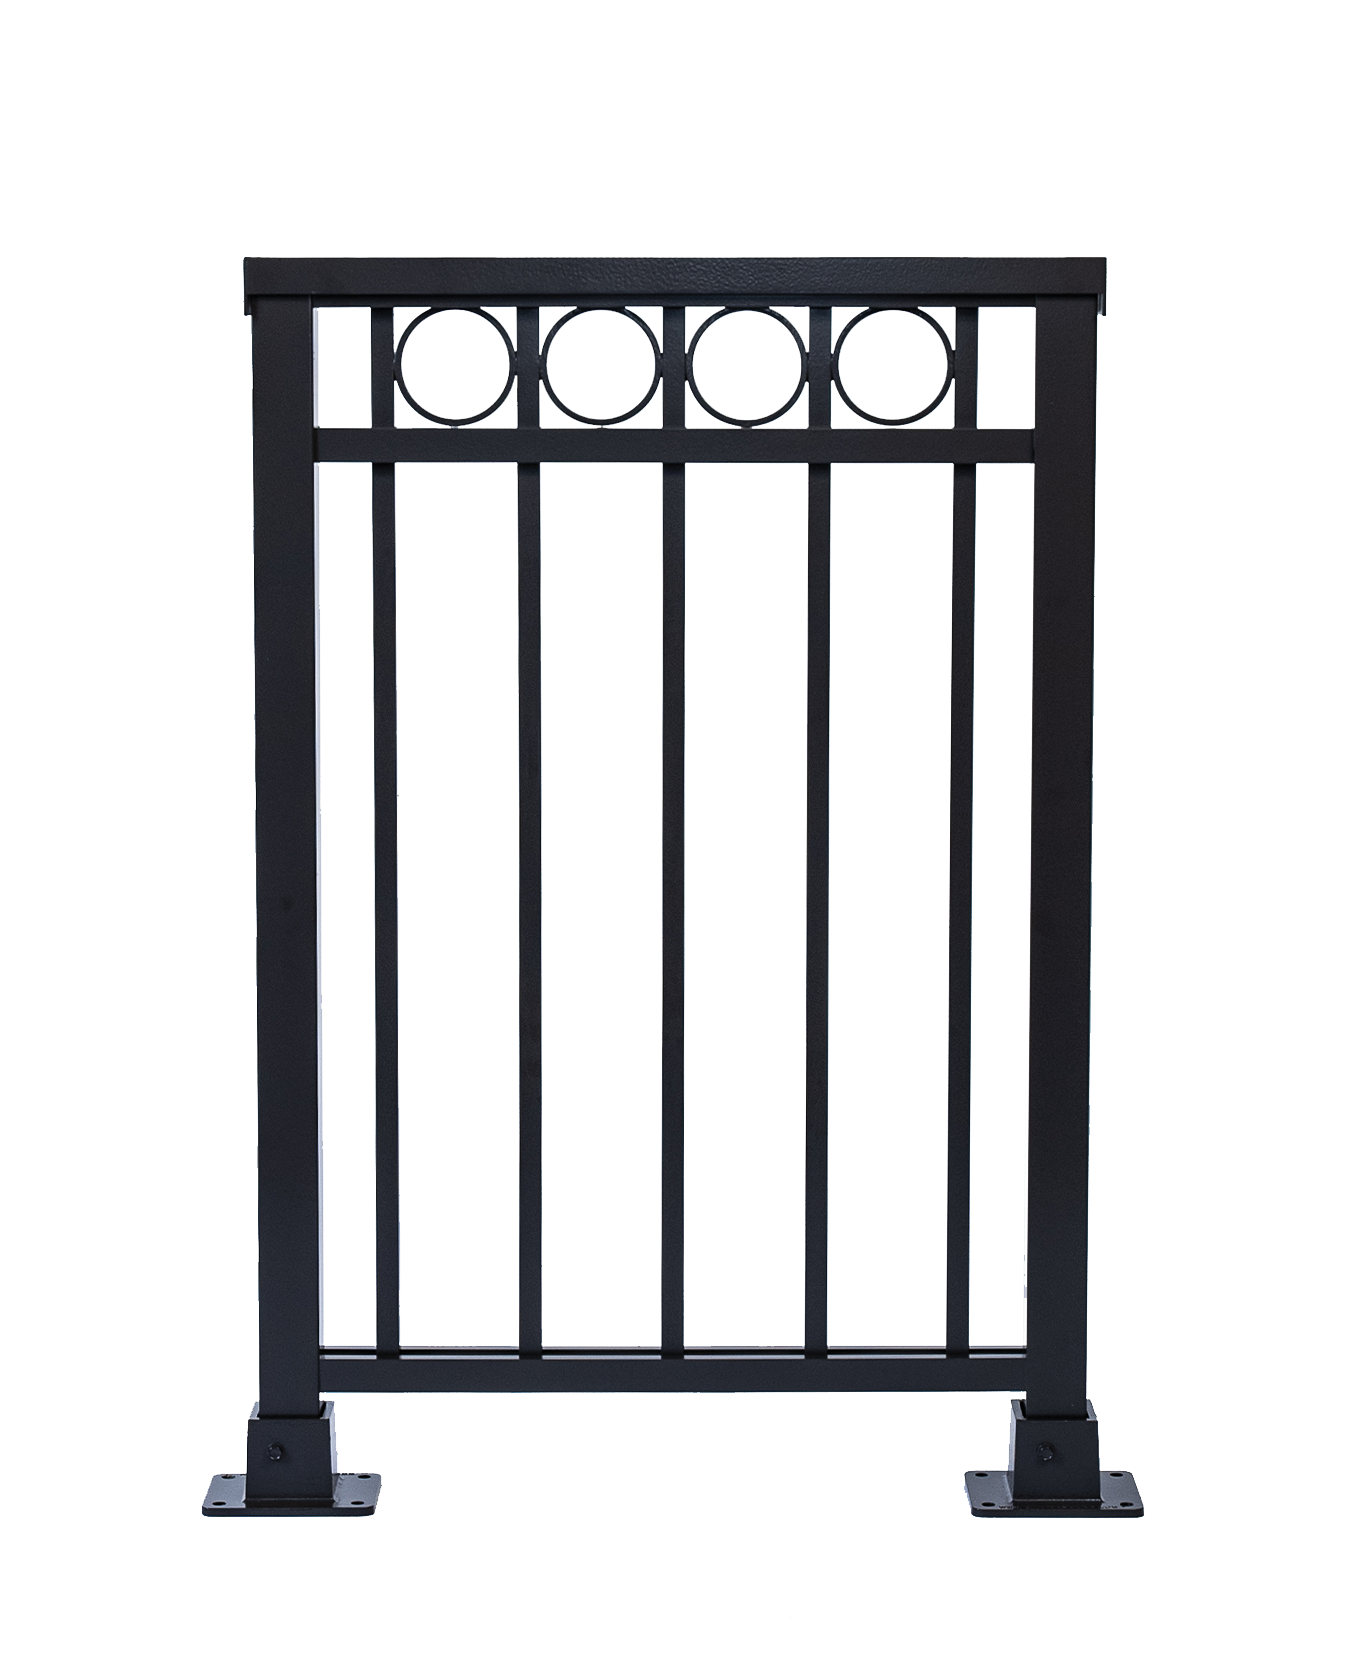 A sample unit of Black Aluminum railing with vertical aluminum bars and circles, M400 1A added accessory rings